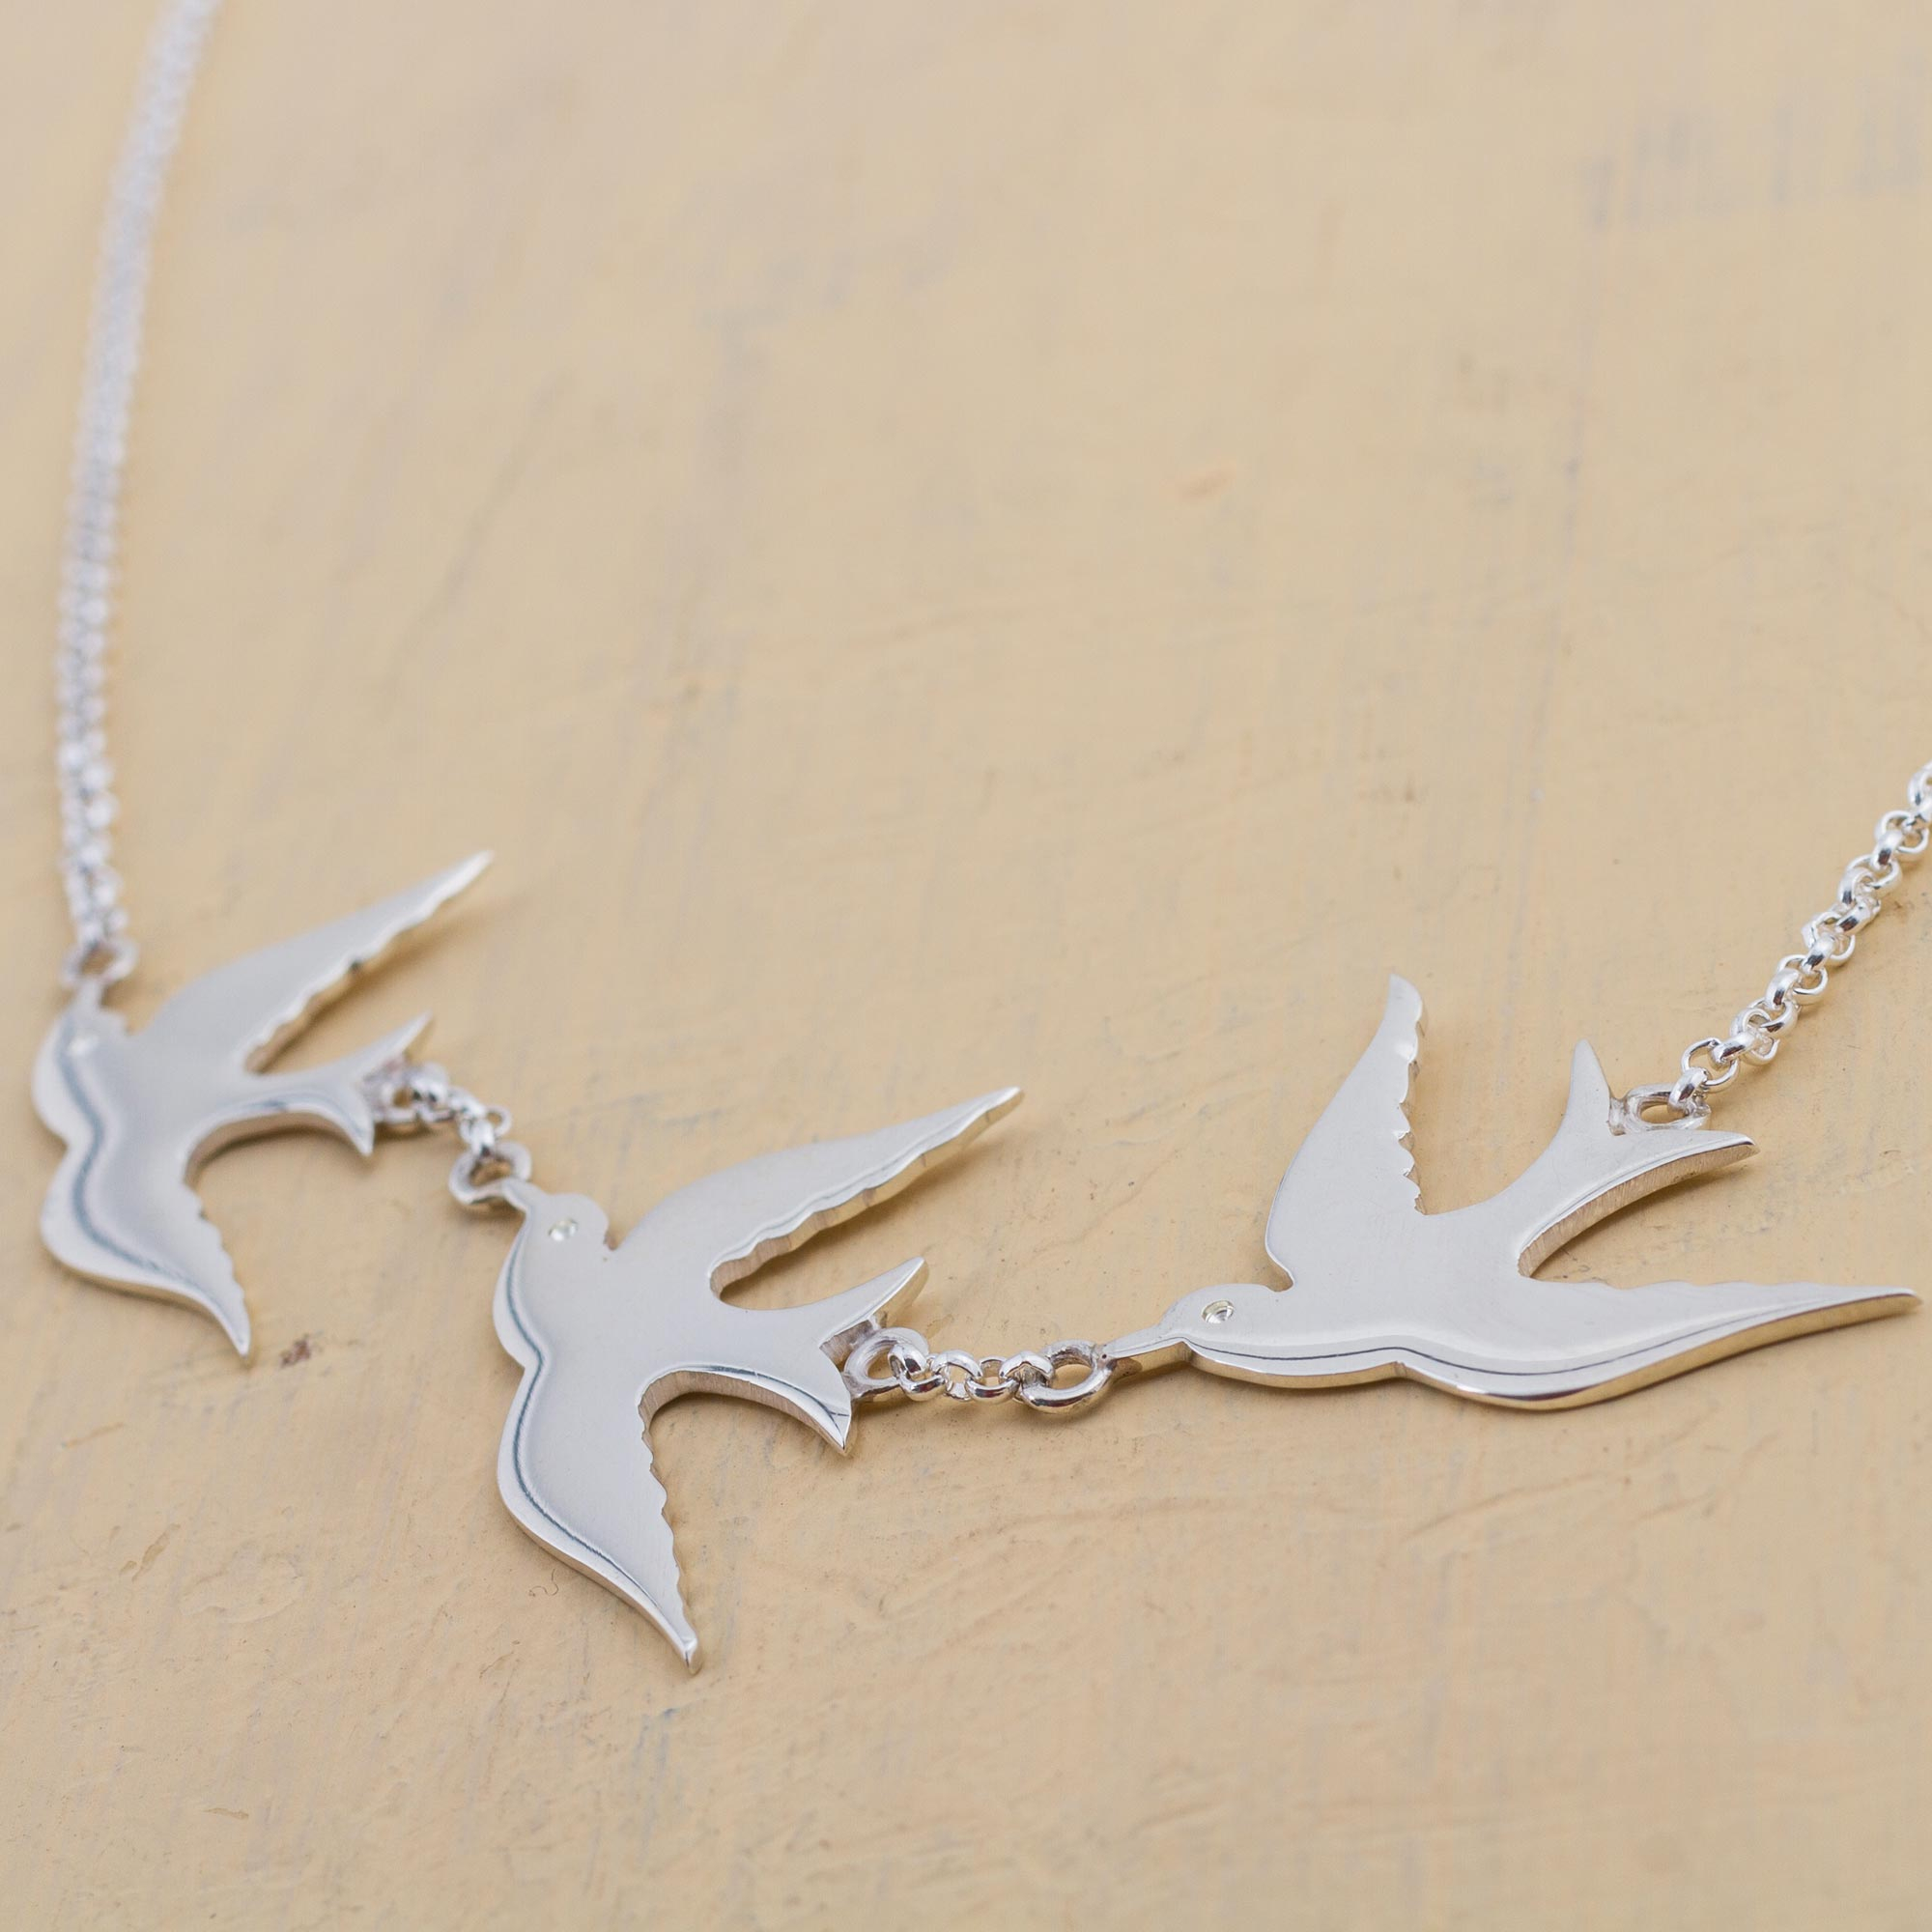 Sterling Silver Pendant Necklace with 3 Birds from Peru - Three Doves ...